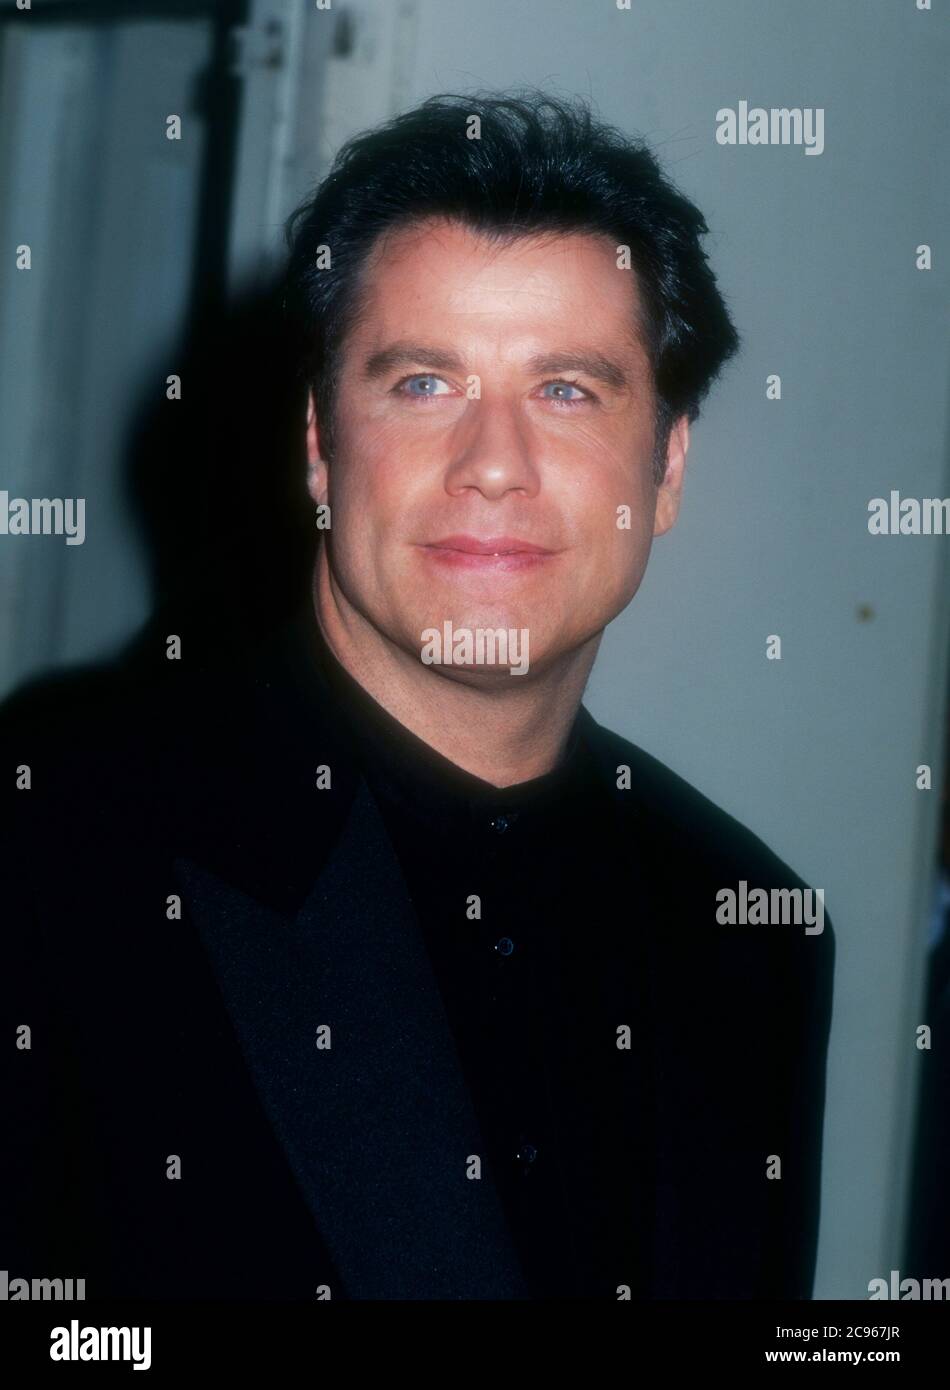 Los Angeles, California, USA 11th February 1996 Actor John Travolta attends the 10th Annual American Comedy Awards on February 11, 1996 at the Shrine Auditorium in Los Angeles, California, USA. Photo by Barry King/Alamy Stock Photo Stock Photo